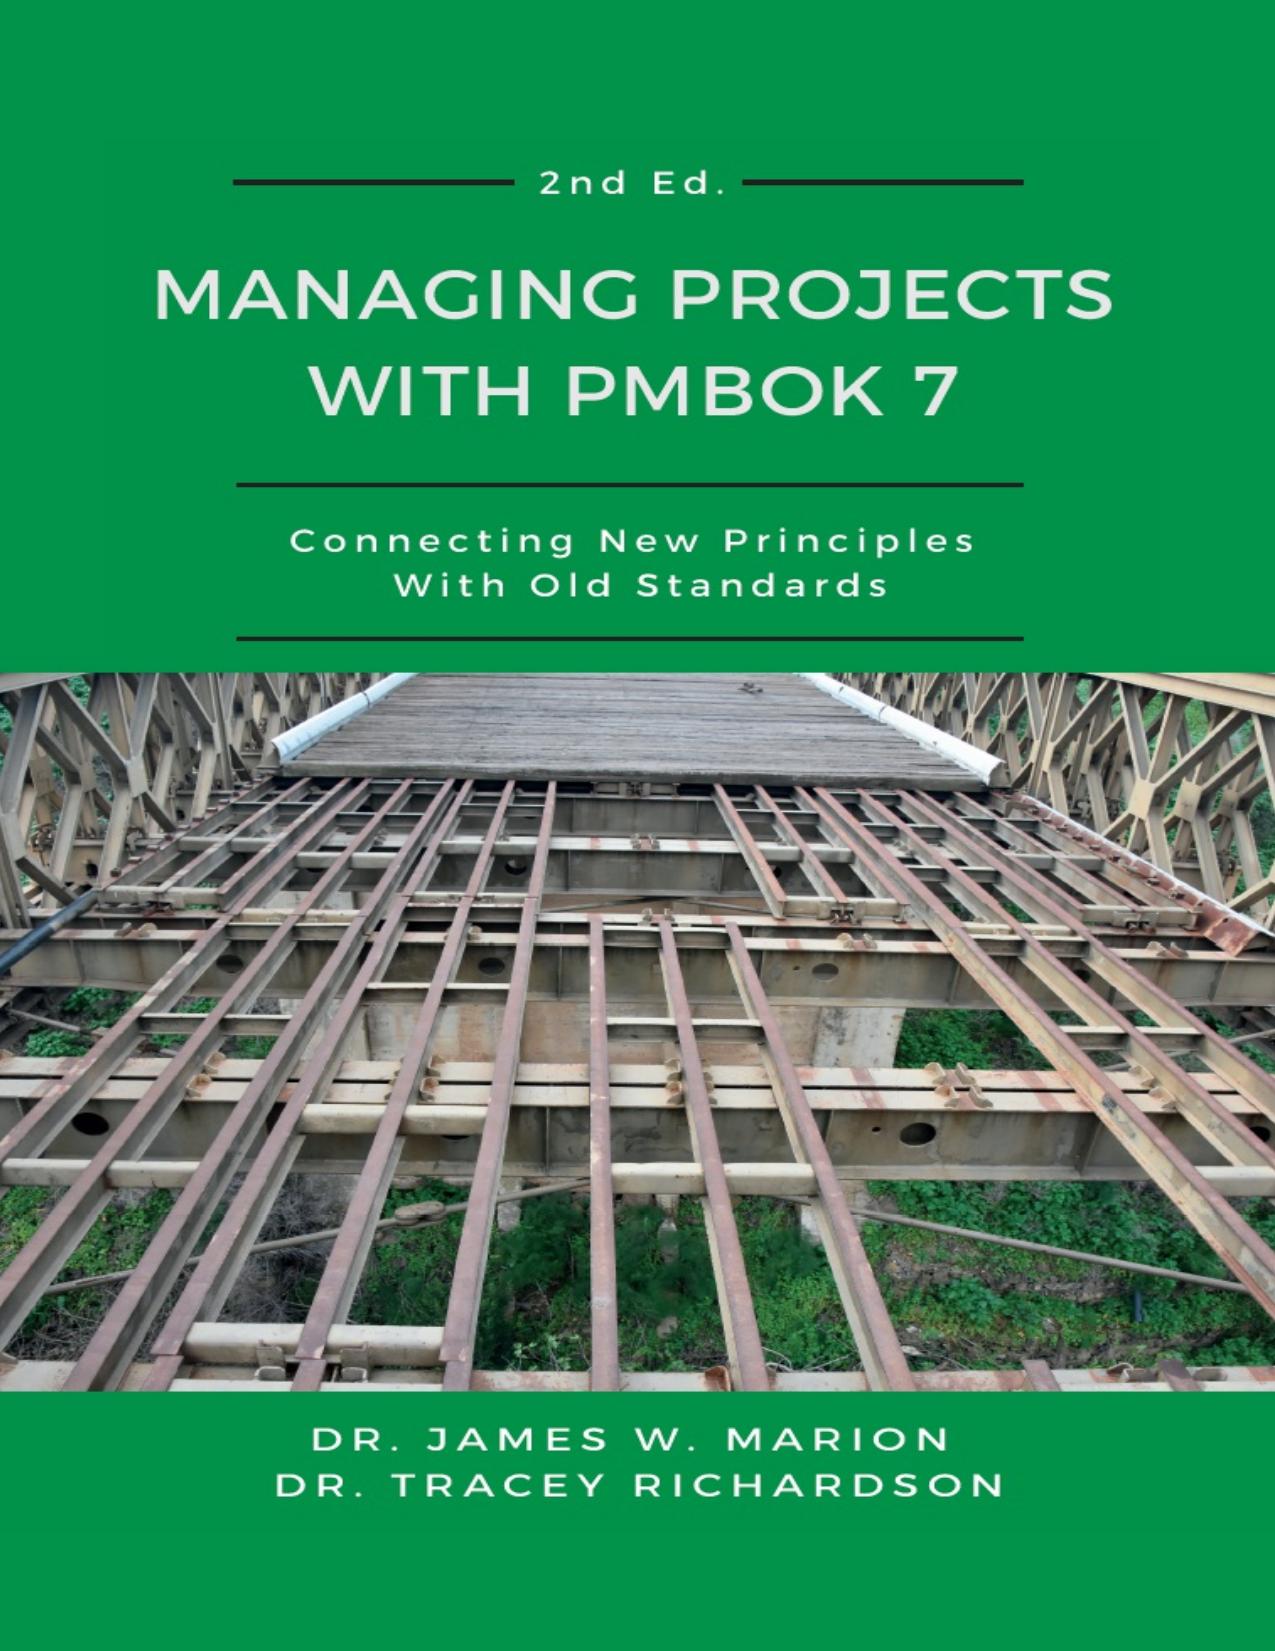 Managing Projects With PMBOK® 7: Connecting New Principles With Old Standards